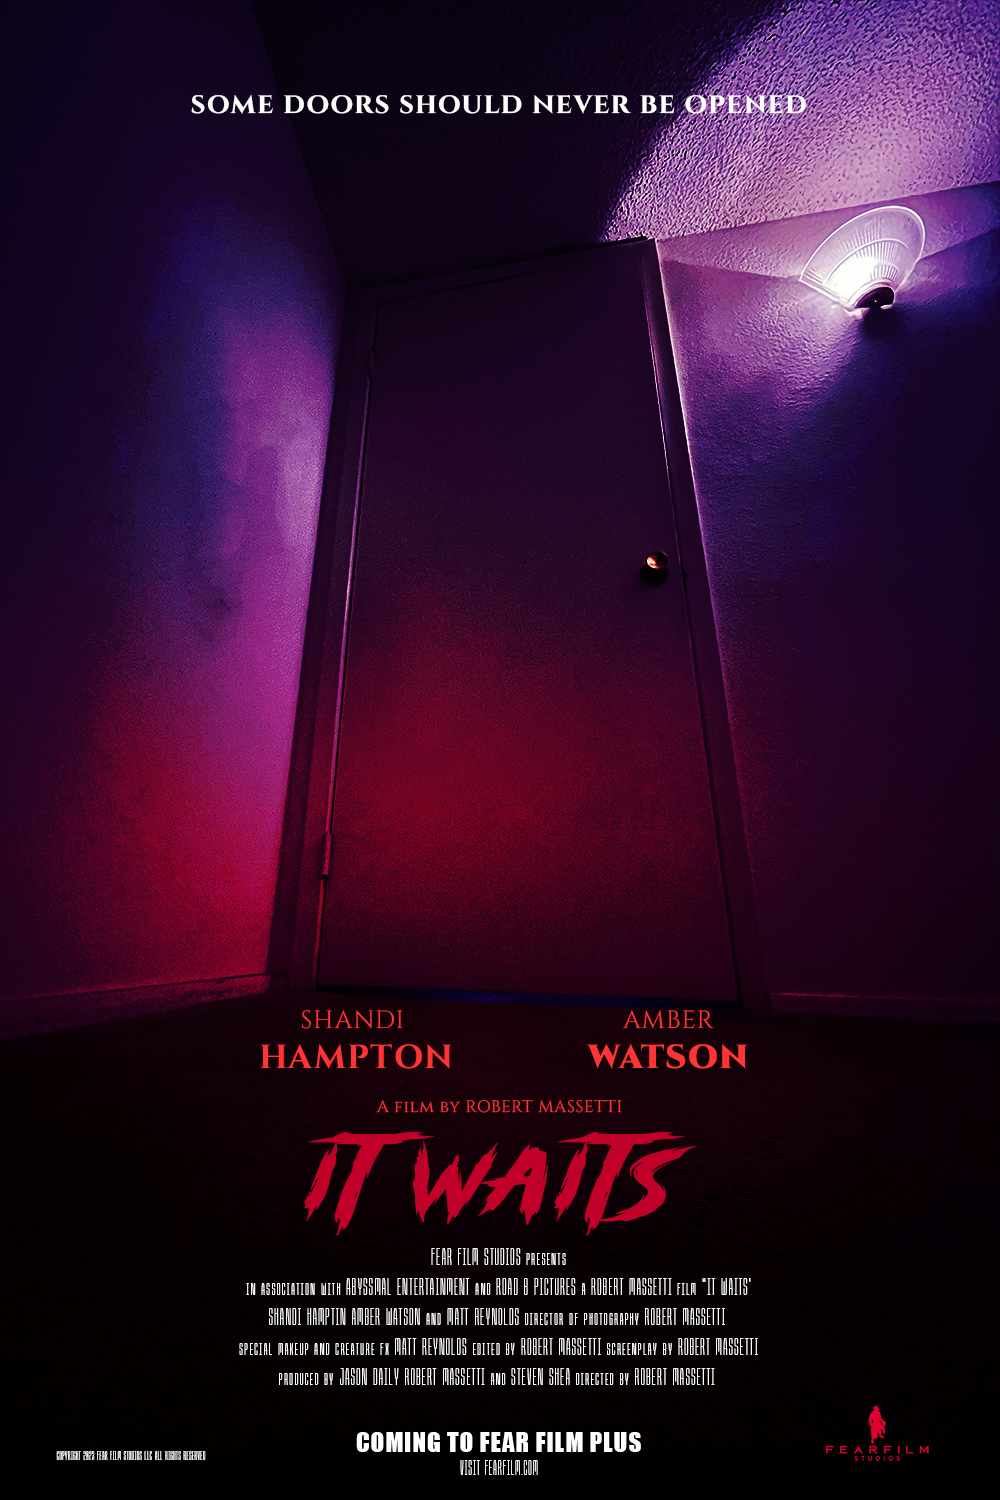 IT WAITS Movie Poster